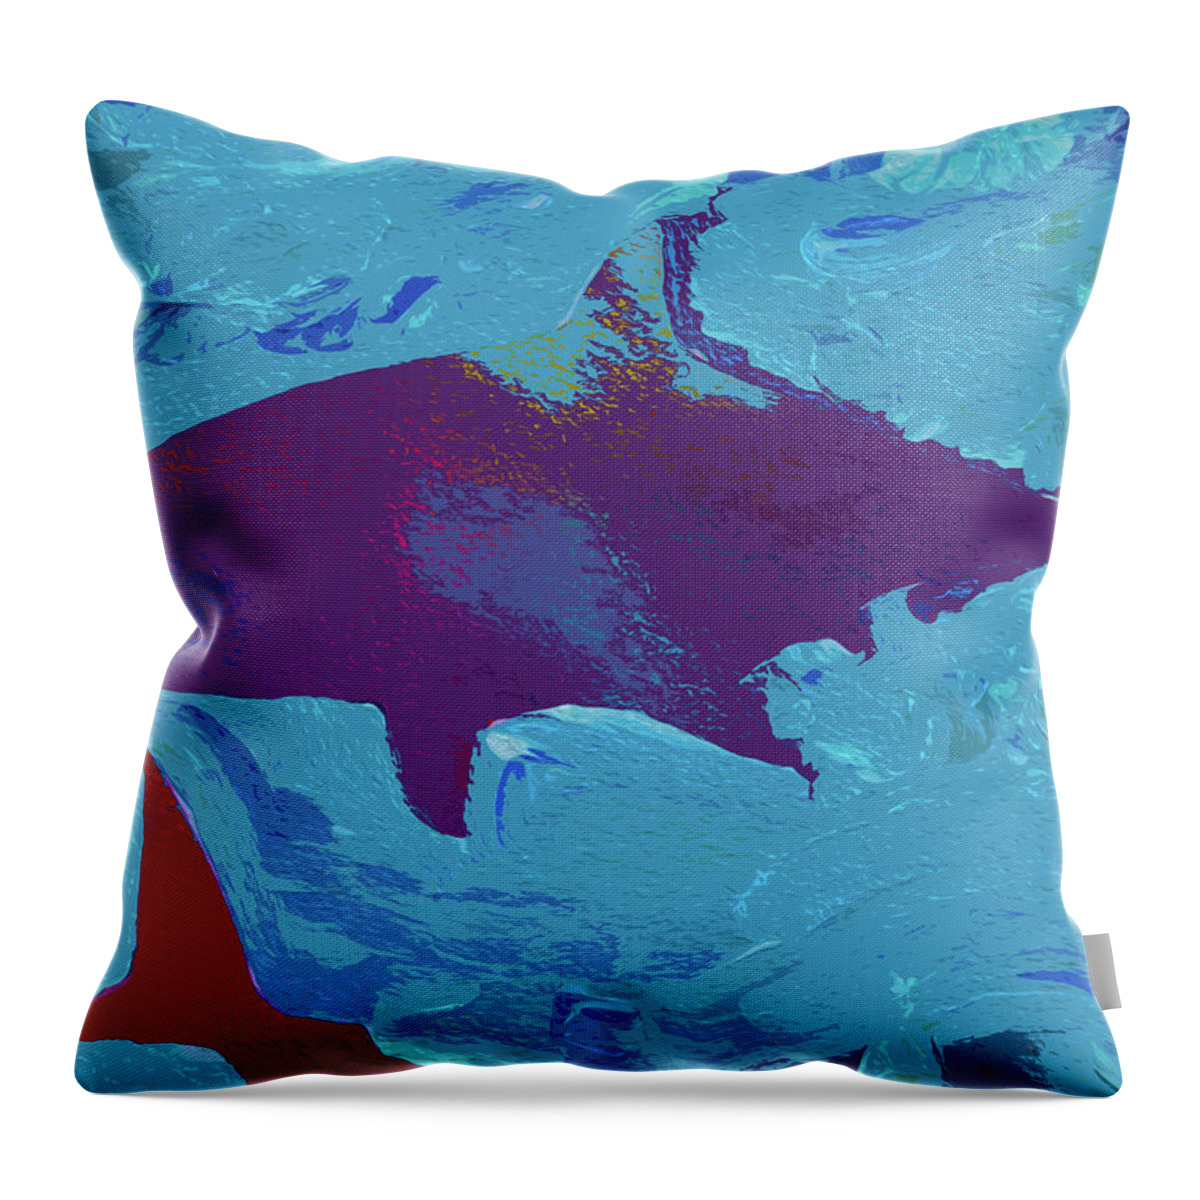 Fish Throw Pillow featuring the painting Great White Shark by Robert Margetts